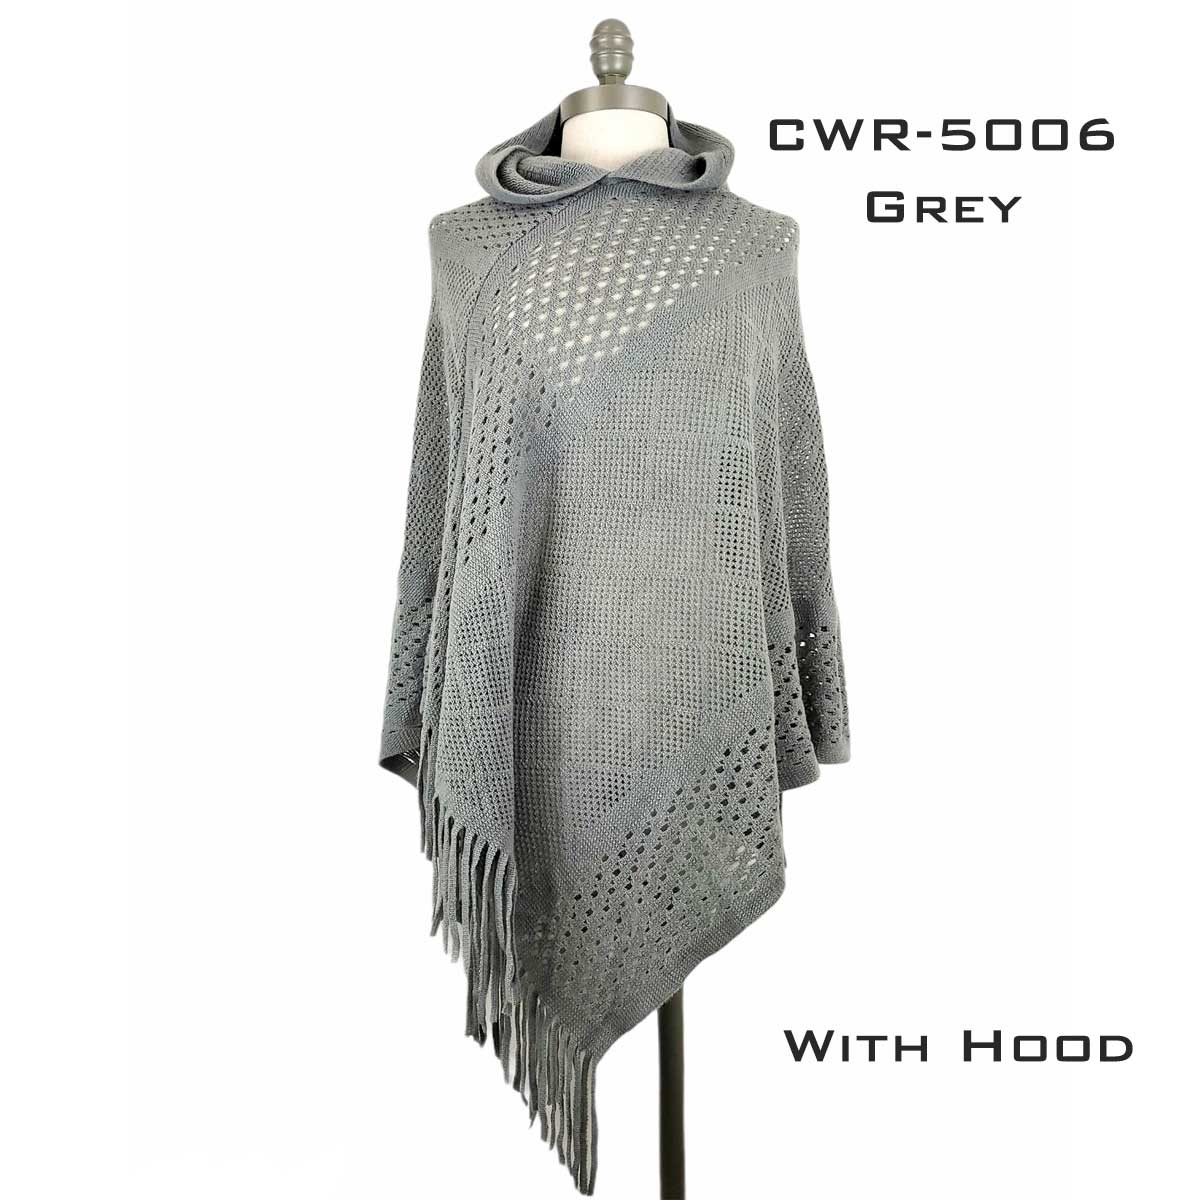 CWR5006 GREY Hooded Poncho with Fringe